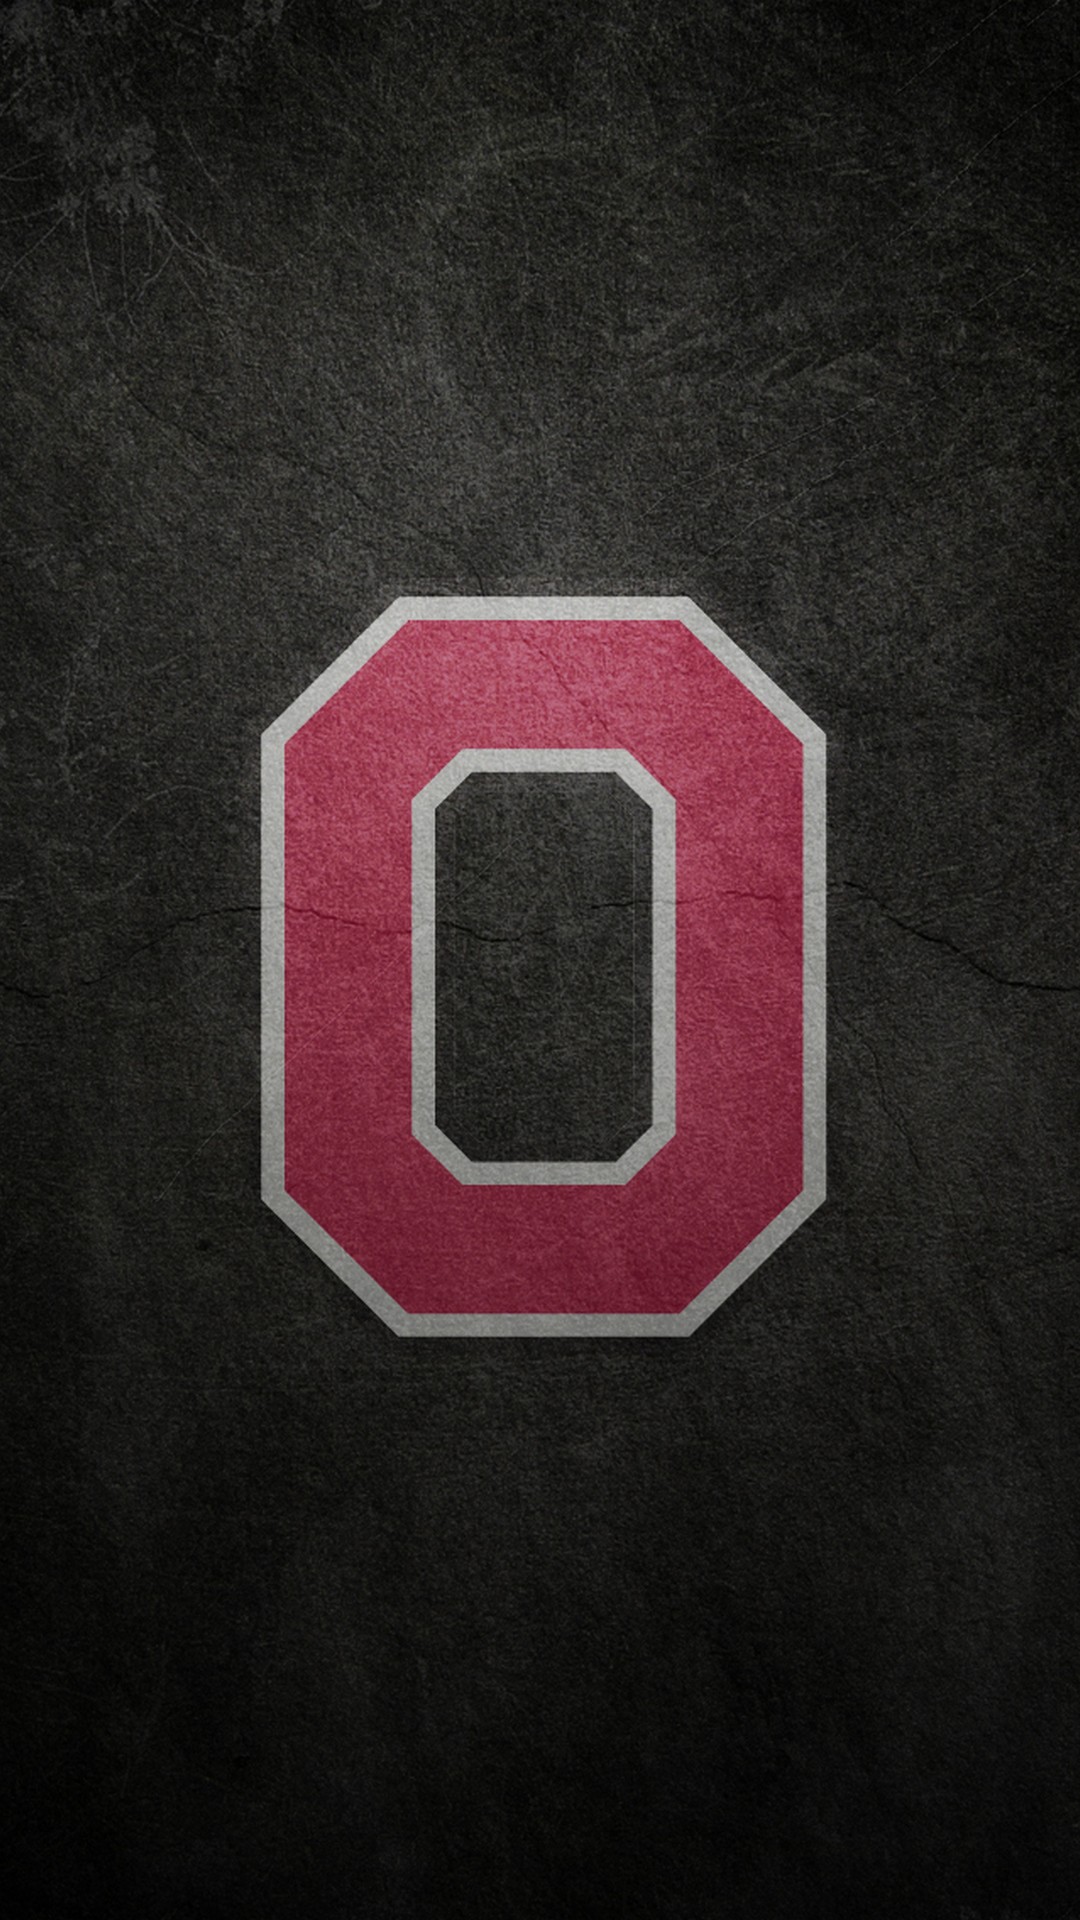 Ohio State Android Wallpaper resolution 1080x1920